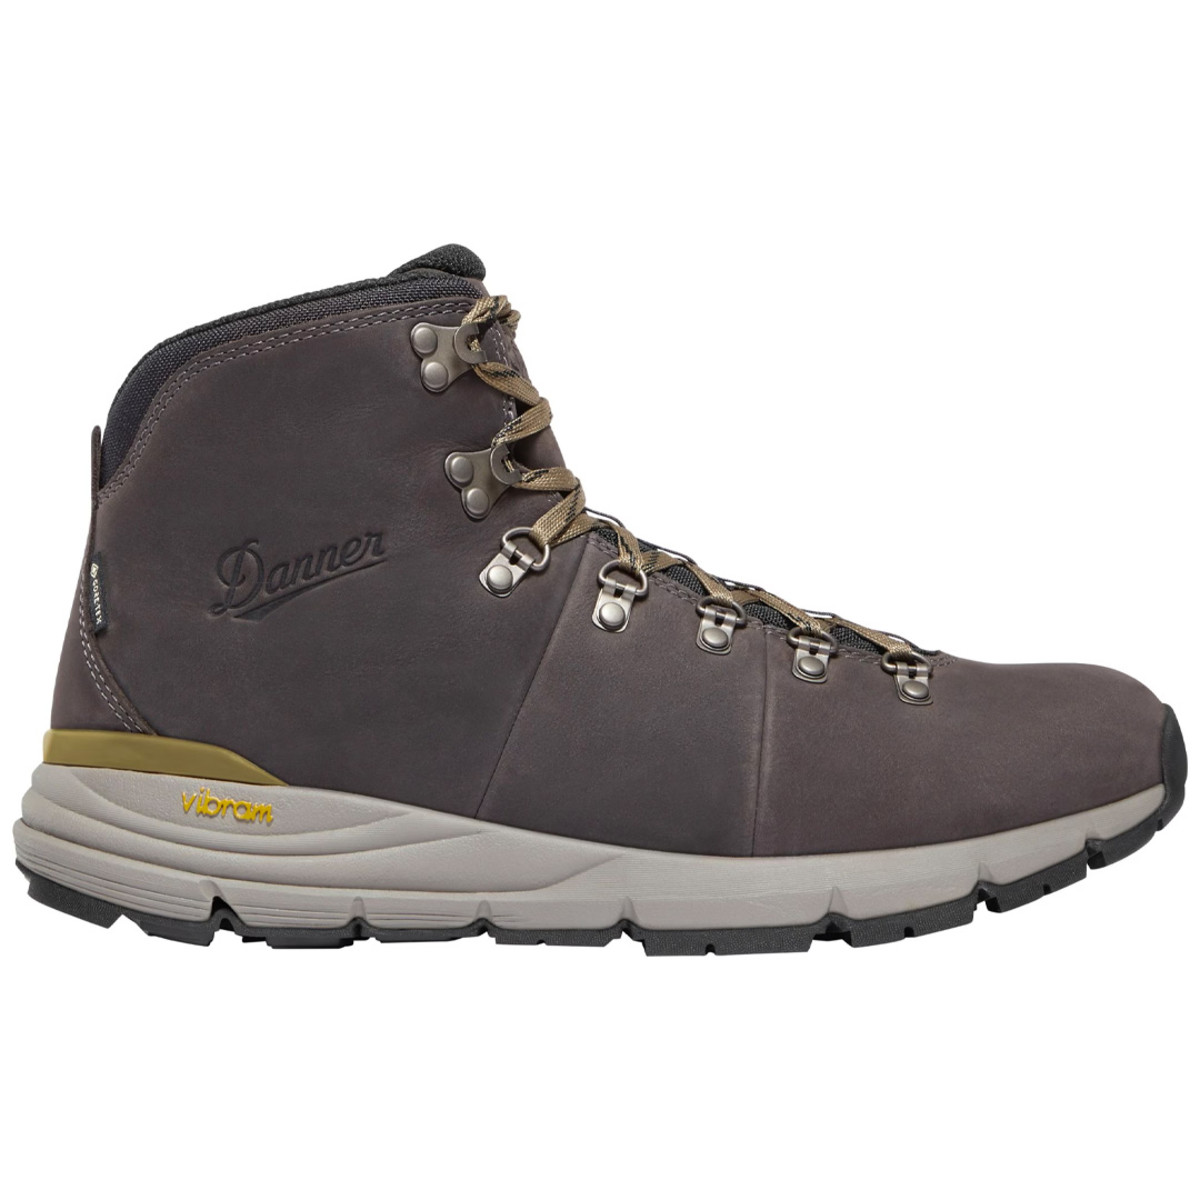 The Danner Jag Hiking Boots Are Now 30% Off at REI - Men's Journal